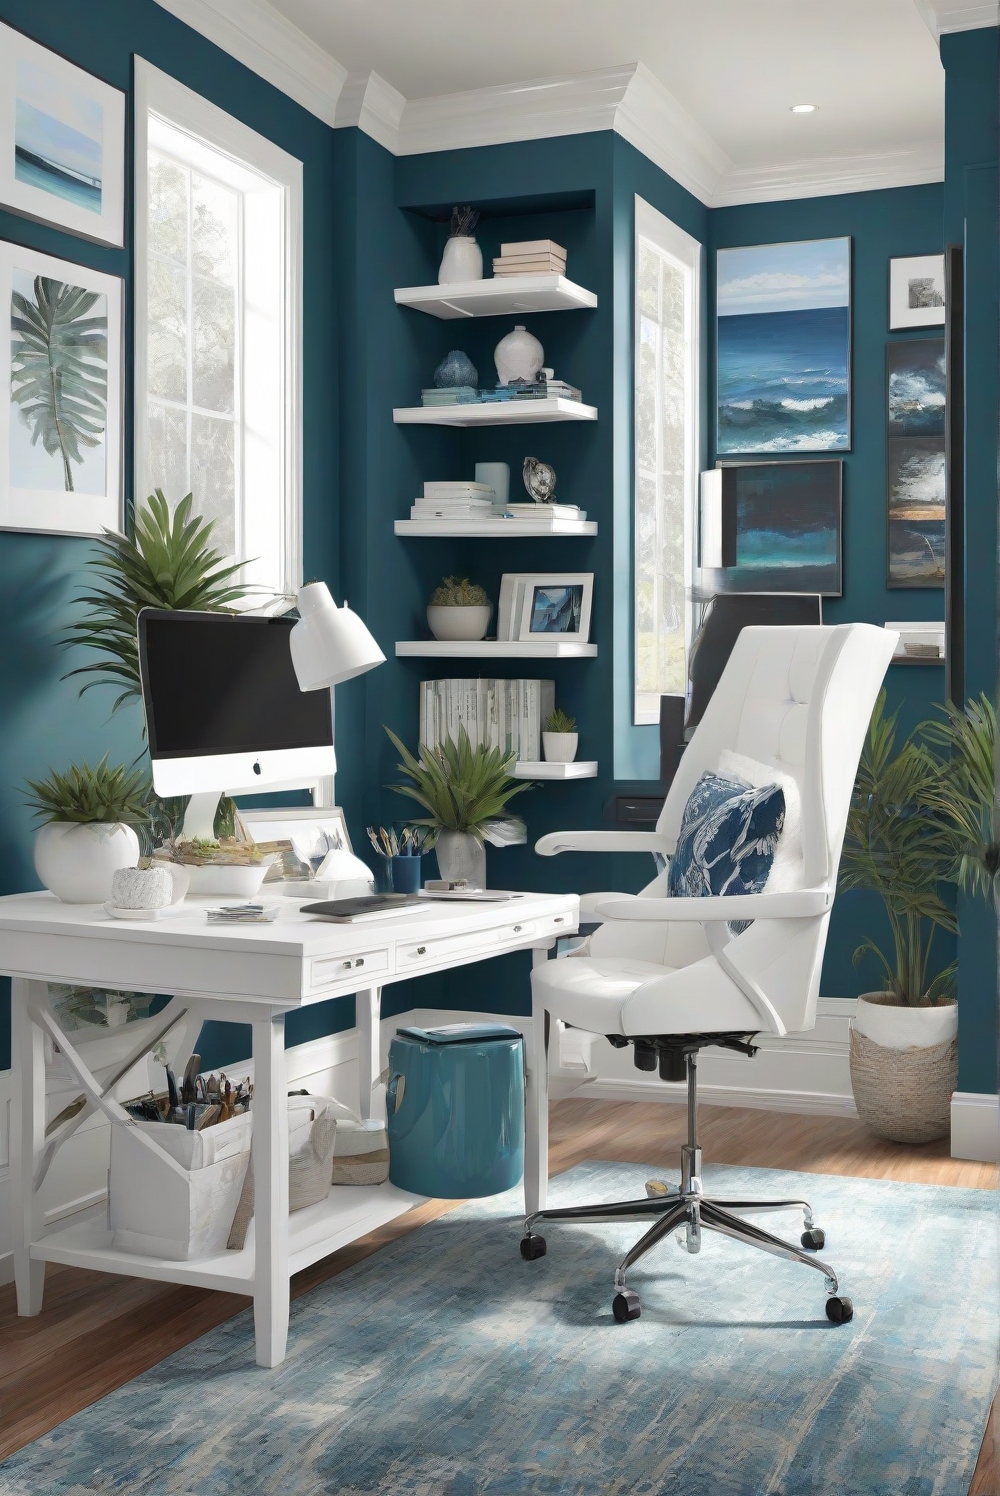 Oceanside, Tranquil Waters, Best Color Combinations, Coastal Bliss, Home Decorating, Home Interior Design, Space Planning Note: The actual CPC rates may vary based on the market conditions and competition.